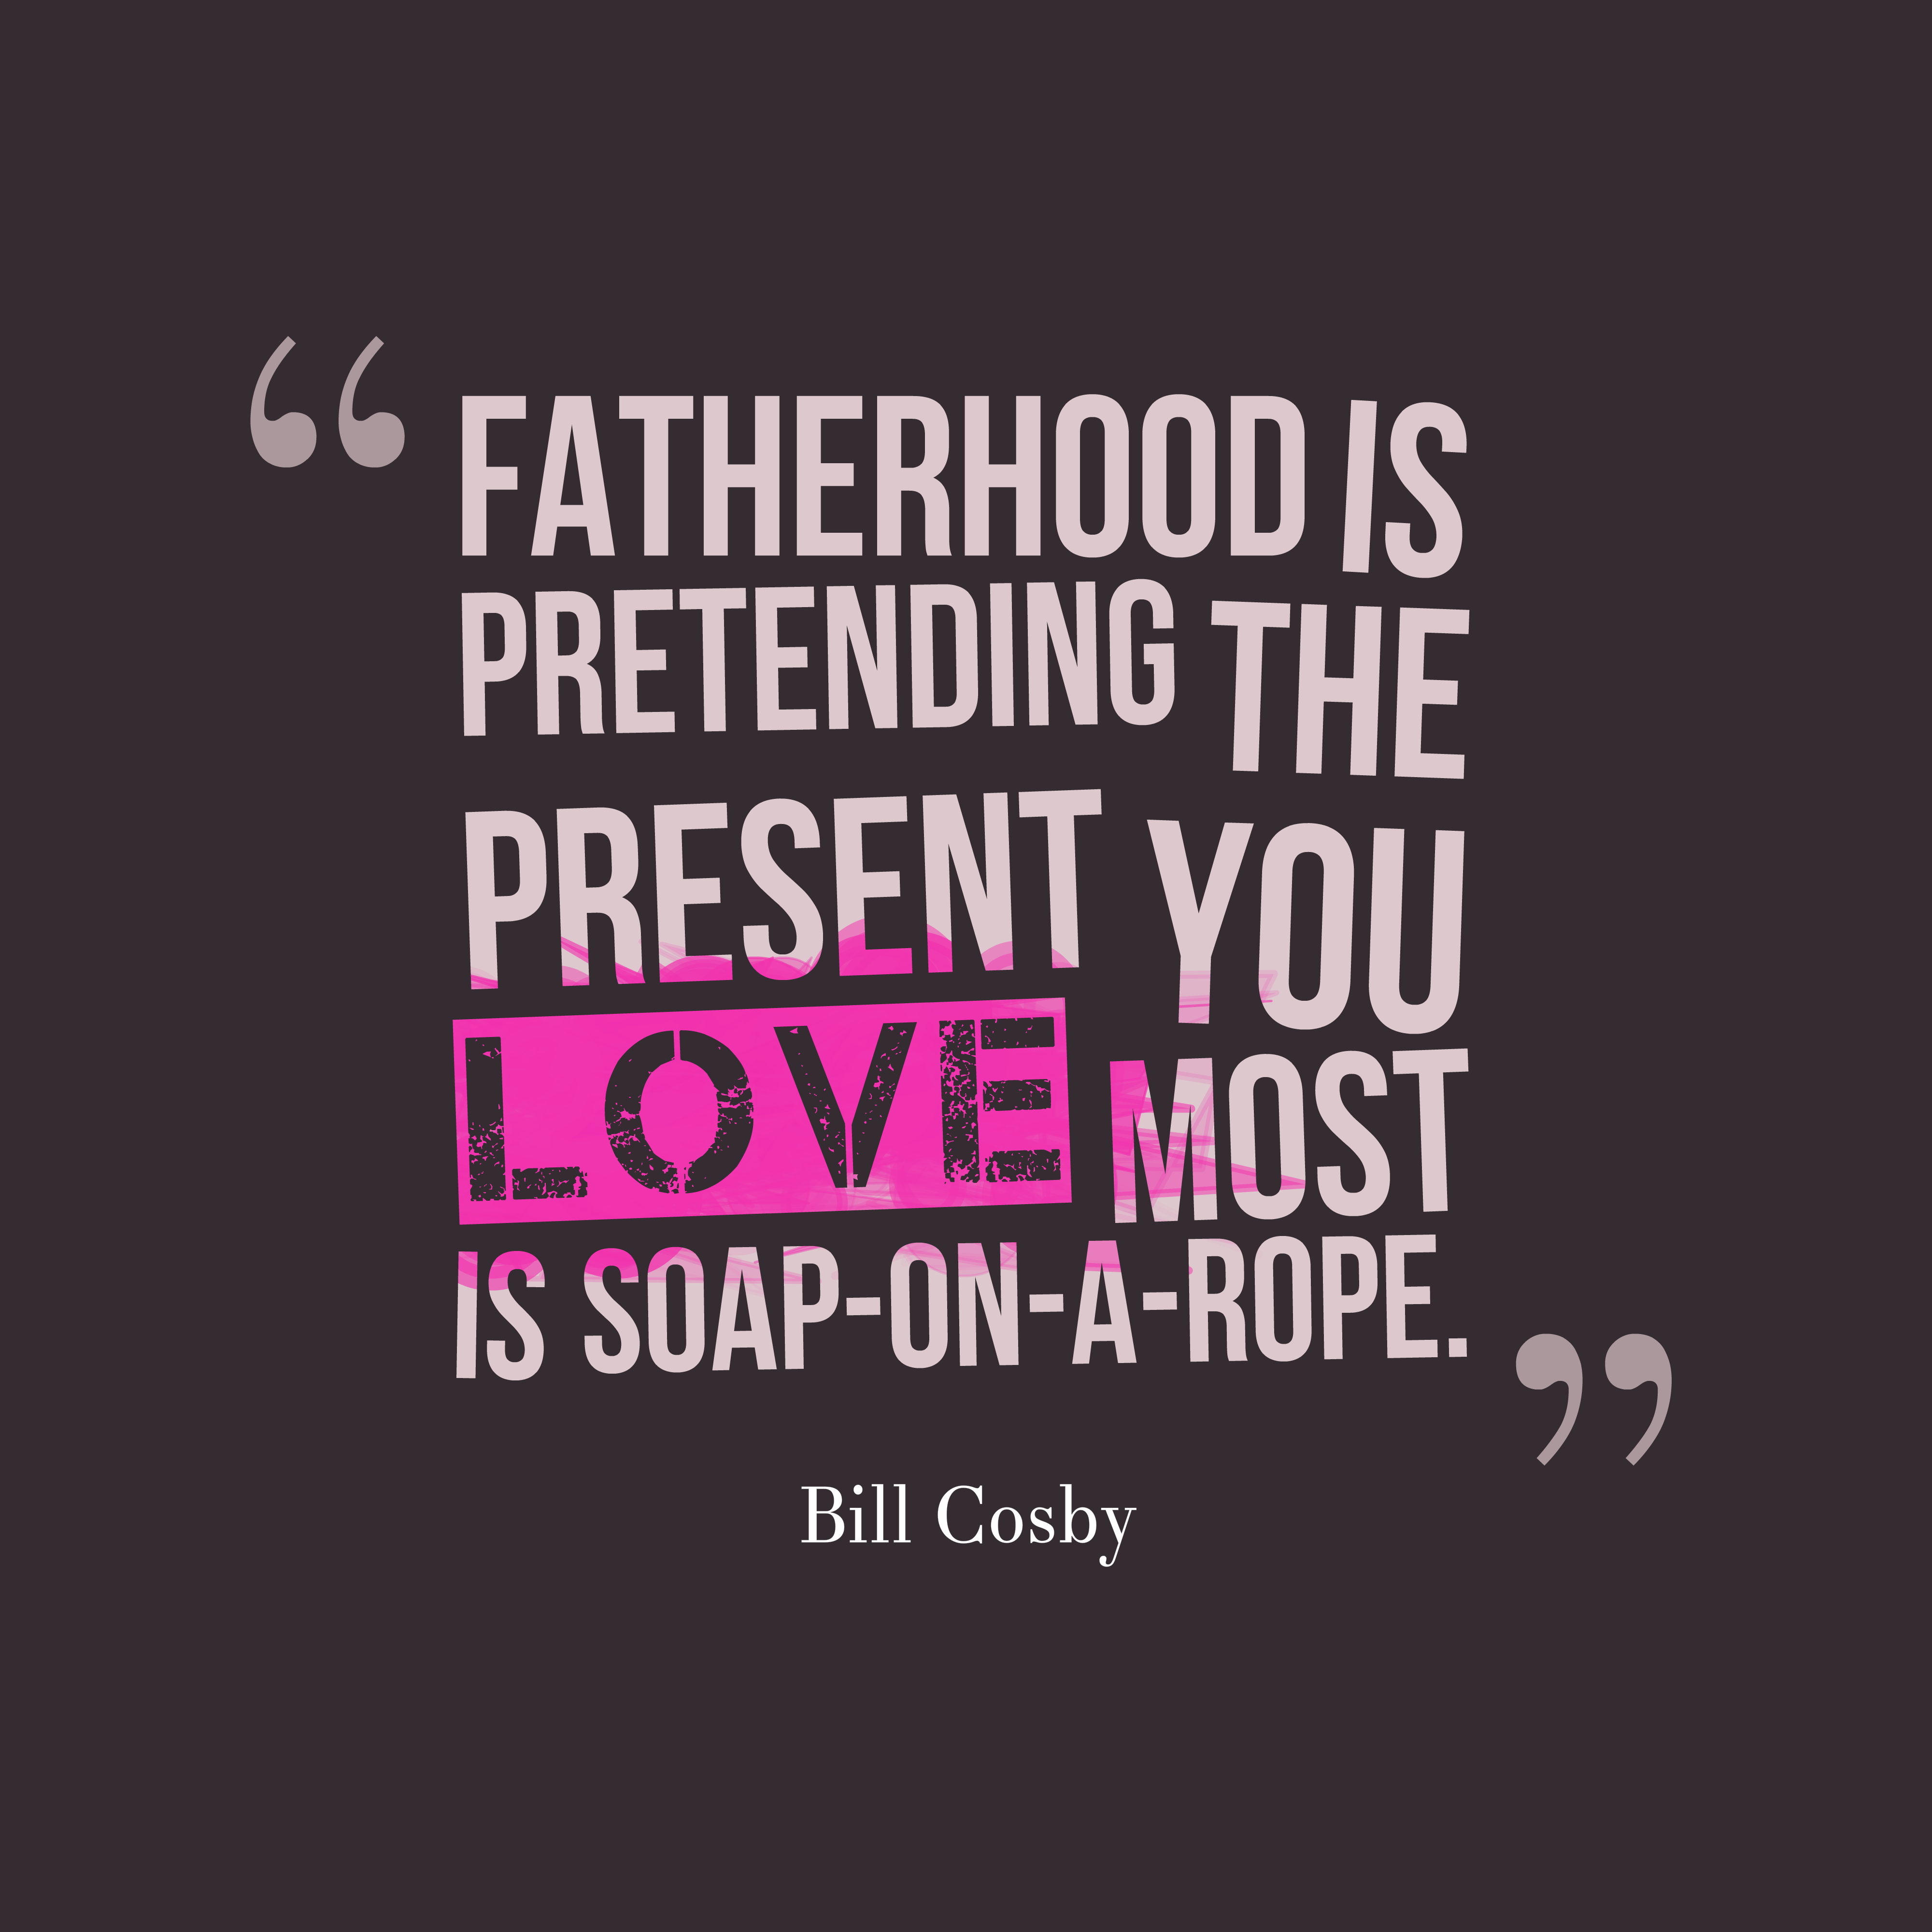 Fatherhood is pretending the present you love most is soap-on-a-rope. Bill Cosby